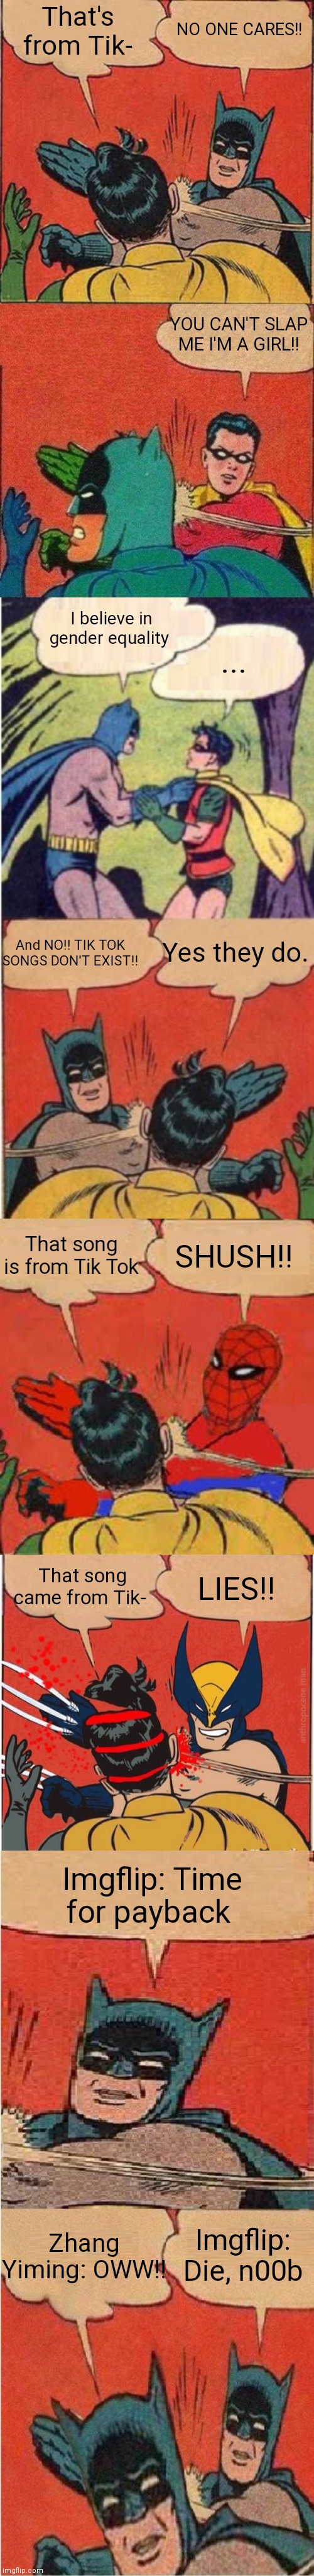 Tik Tokers these days | That's from Tik-; NO ONE CARES!! YOU CAN'T SLAP ME I'M A GIRL!! I believe in gender equality; ... And NO!! TIK TOK SONGS DON'T EXIST!! Yes they do. That song is from Tik Tok; SHUSH!! That song came from Tik-; LIES!! Imgflip: Time for payback; Zhang Yiming: OWW!! Imgflip: Die, n00b | image tagged in memes,ultimate slap fight,tik tok,imgflip | made w/ Imgflip meme maker